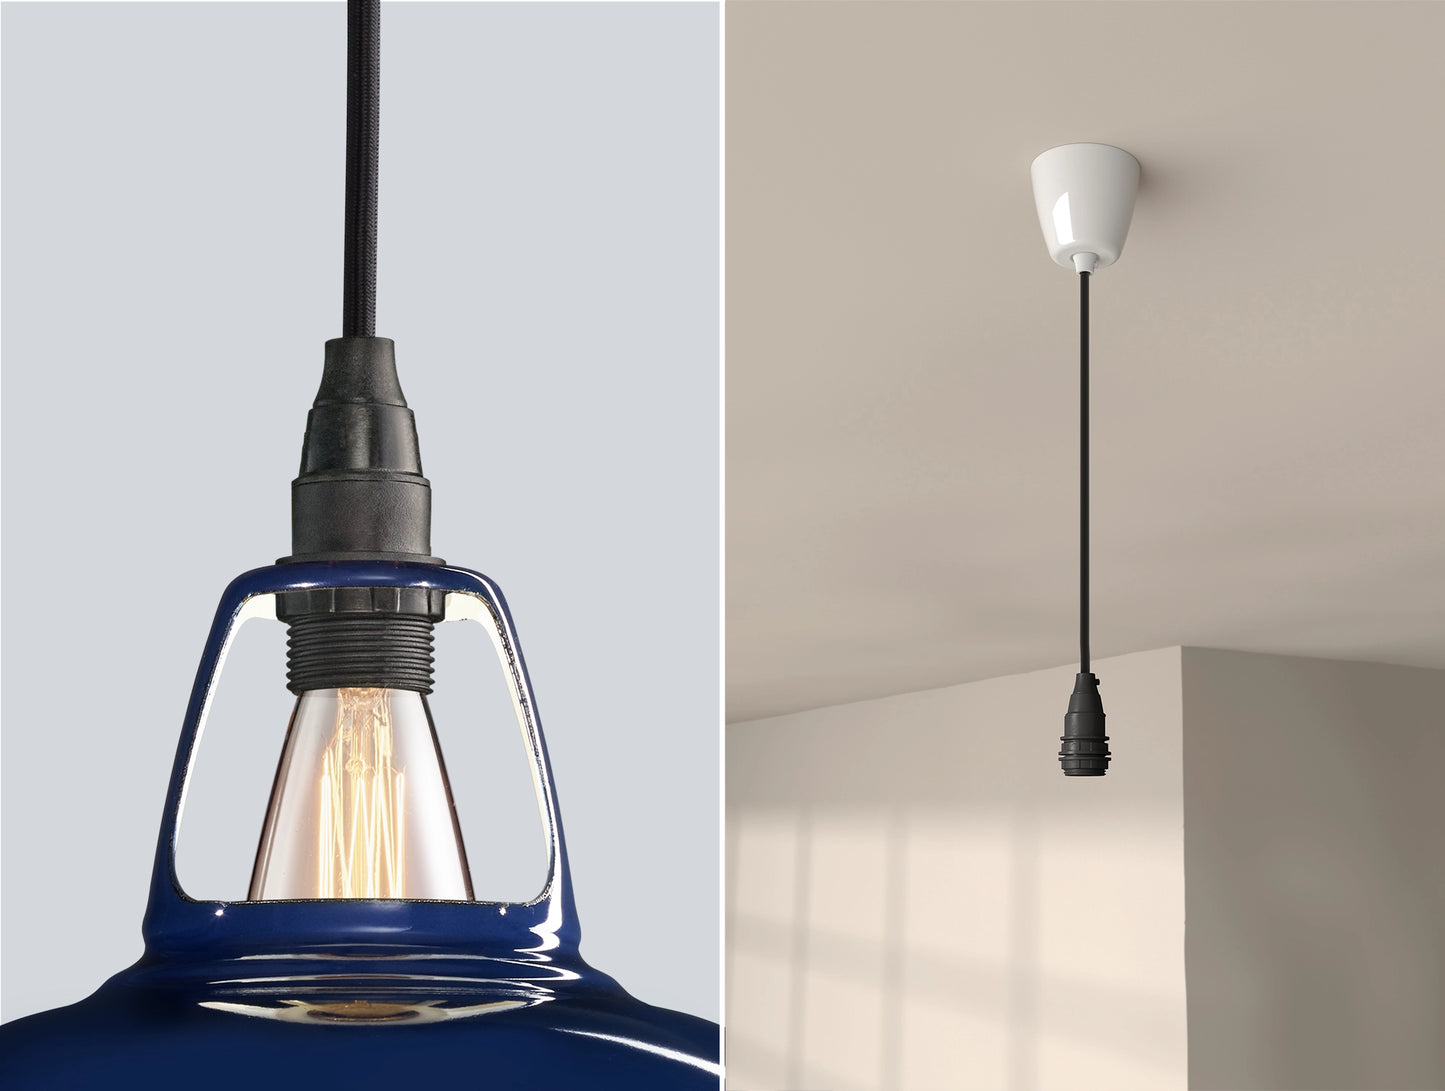 Close up of an E14 Industrial suspension set on a Royal Blue lampshade on the left. On the right, an E14 Industrial pendant set is hanging from the ceiling